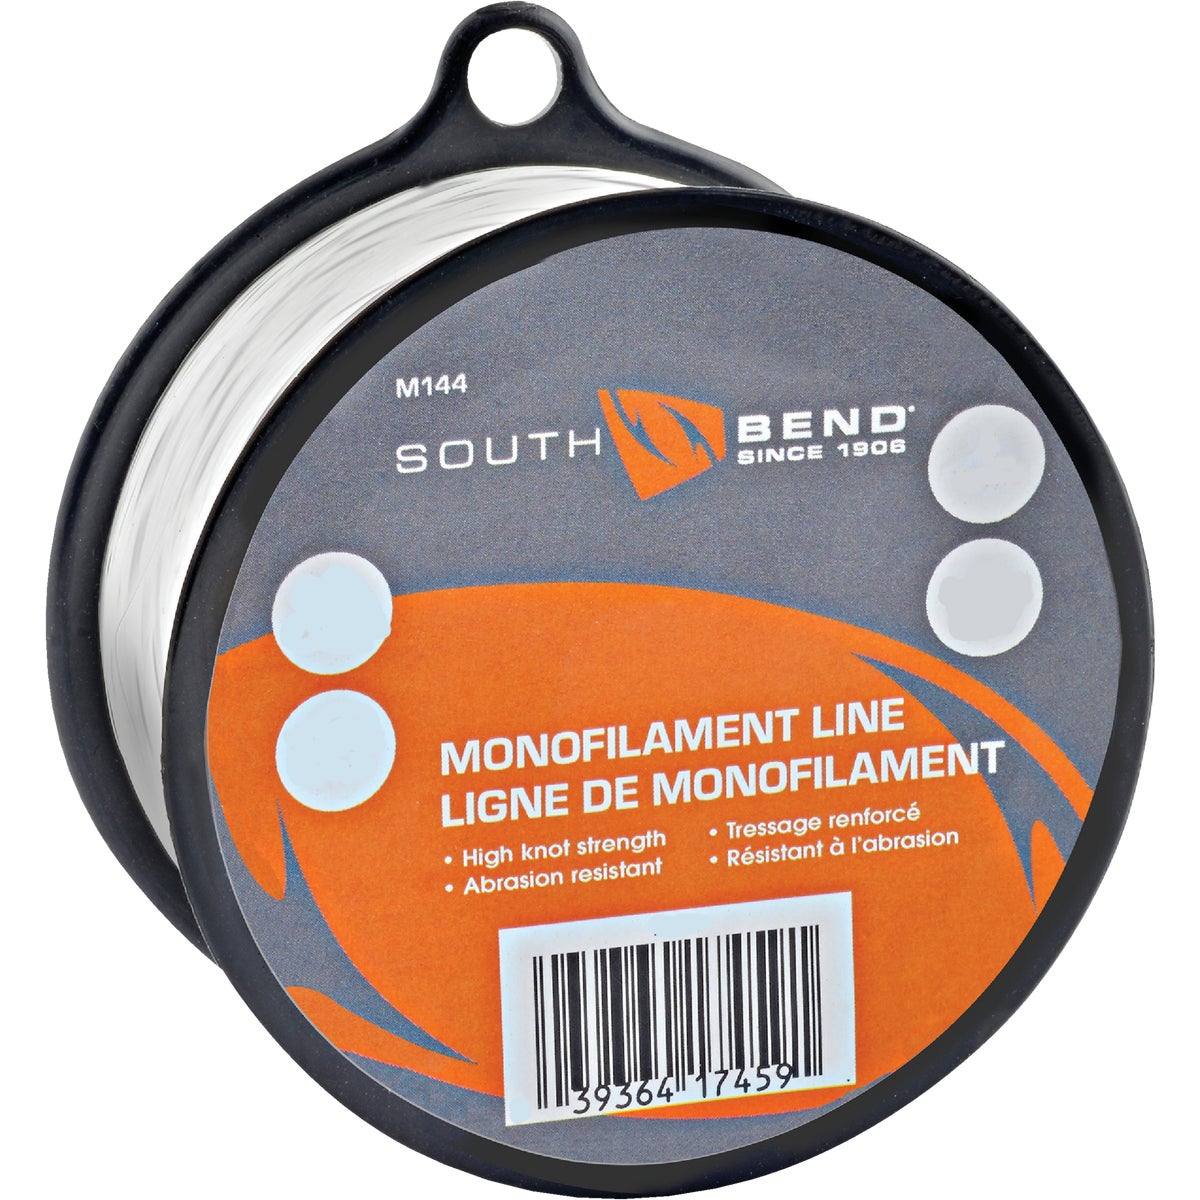 SouthBend 12 Lb. 500 Yd. Clear Monofilament Fishing Line